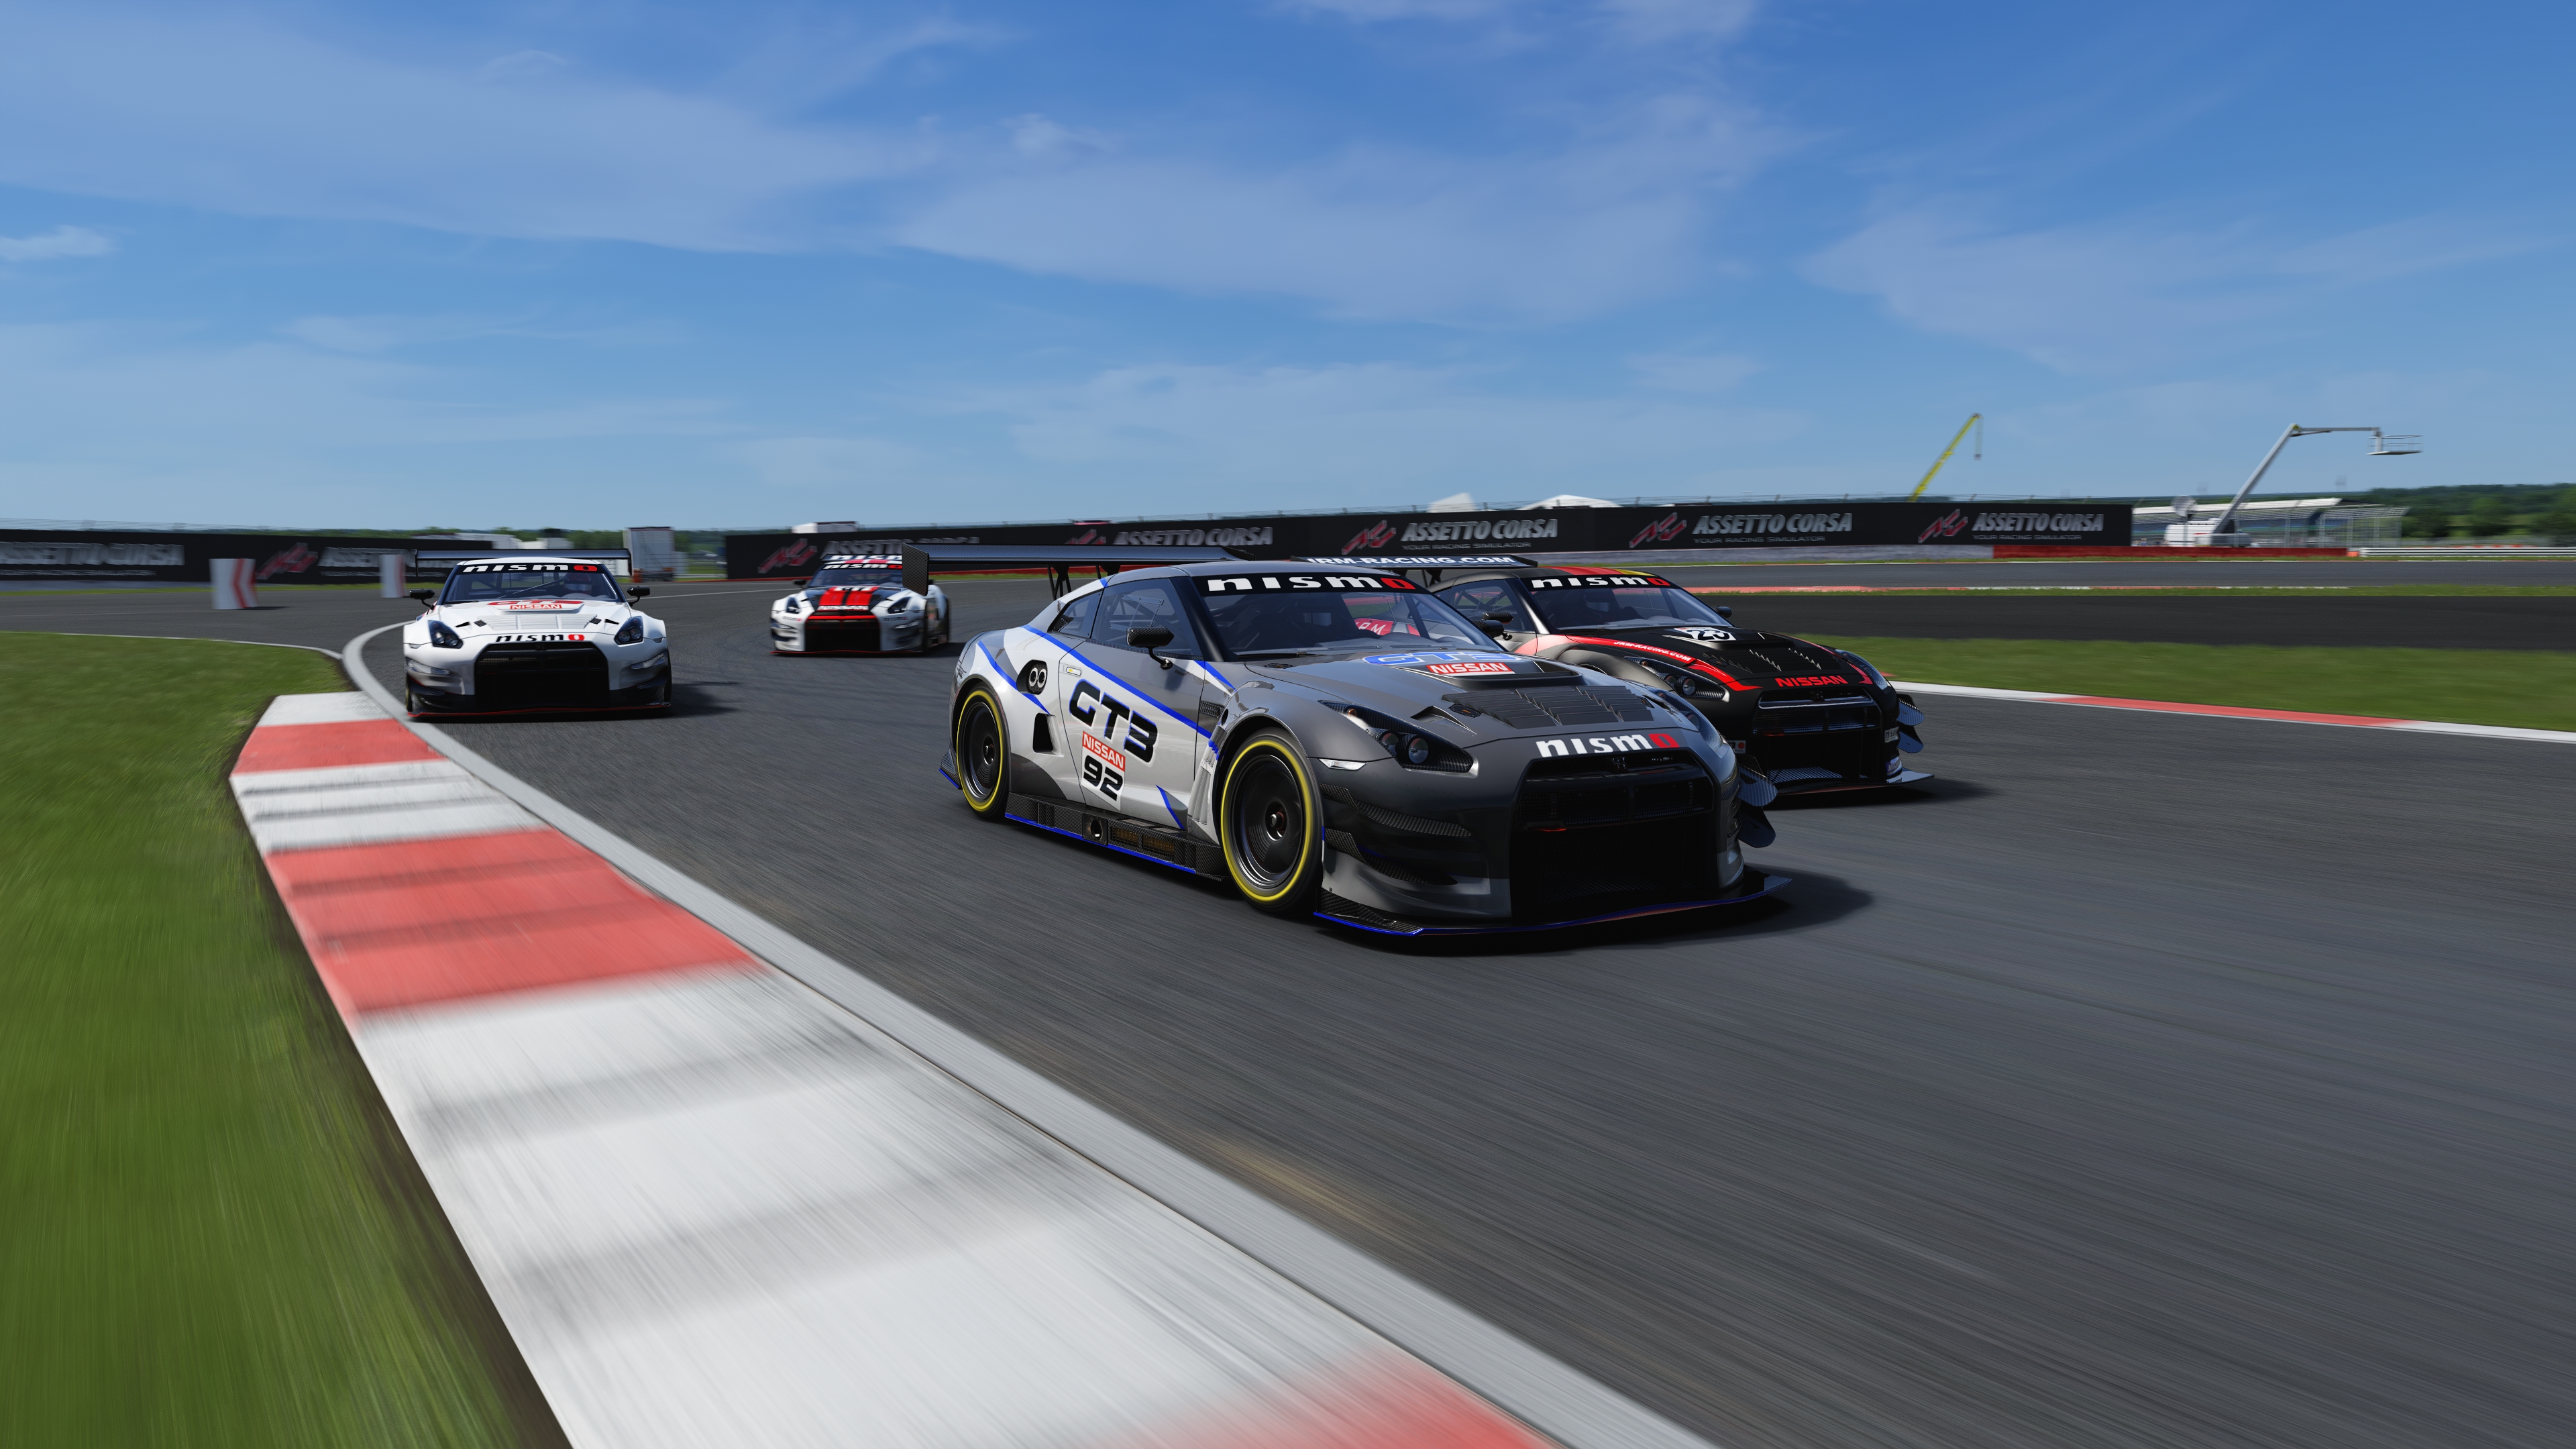 General 3840x2160 GT3 racing Nissan GT-R Nissan GT-R NISMO Silverstone Assetto Corsa frontal view CGI car race cars racing video games race tracks sky clouds vehicle grass